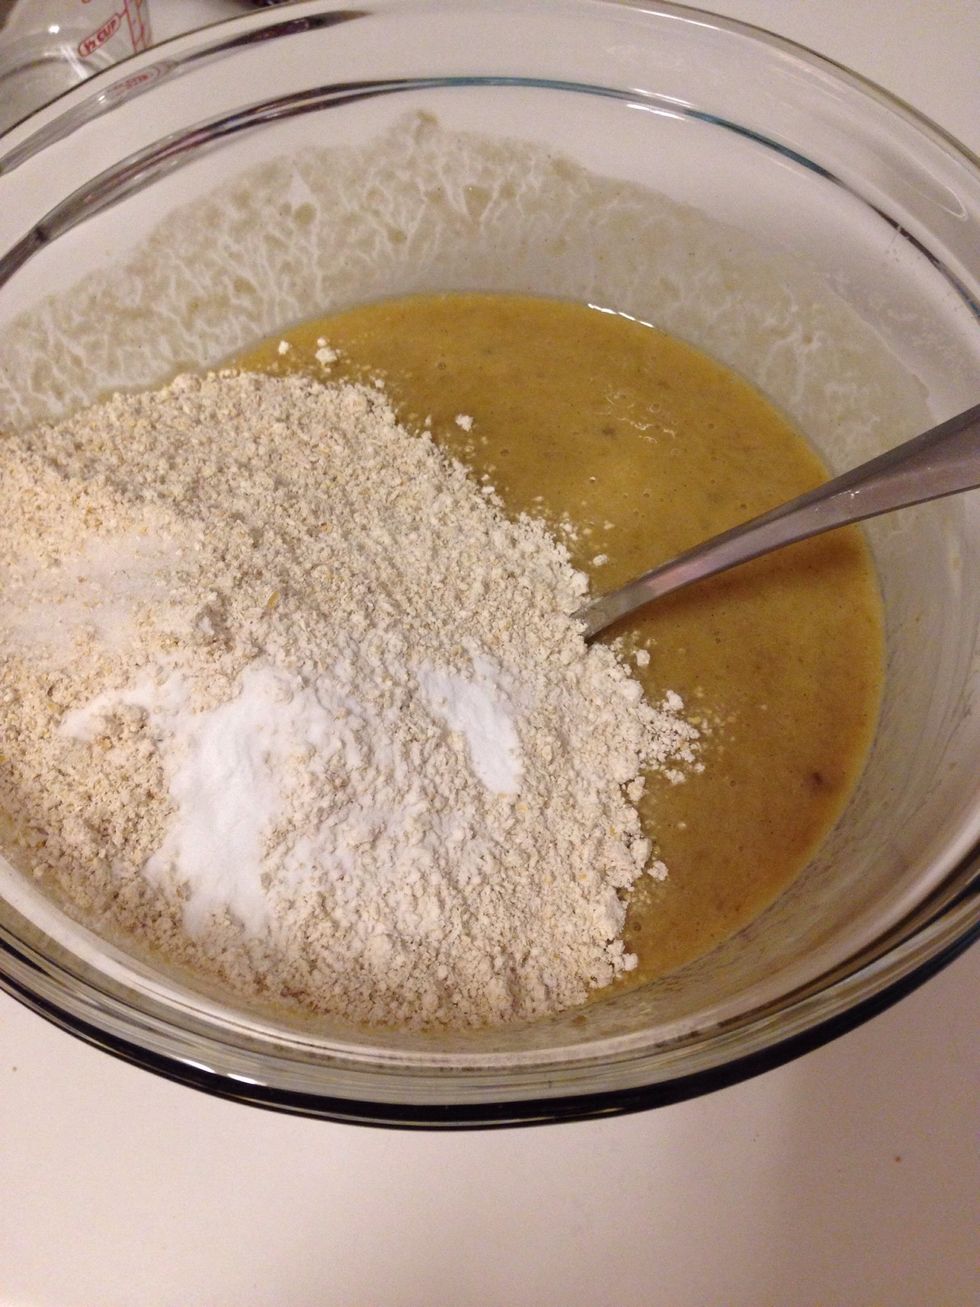 Add the flour, salt, and baking soda to the wet ingredients and stir until JUST combined (over-mixing will lead to a denser bread).